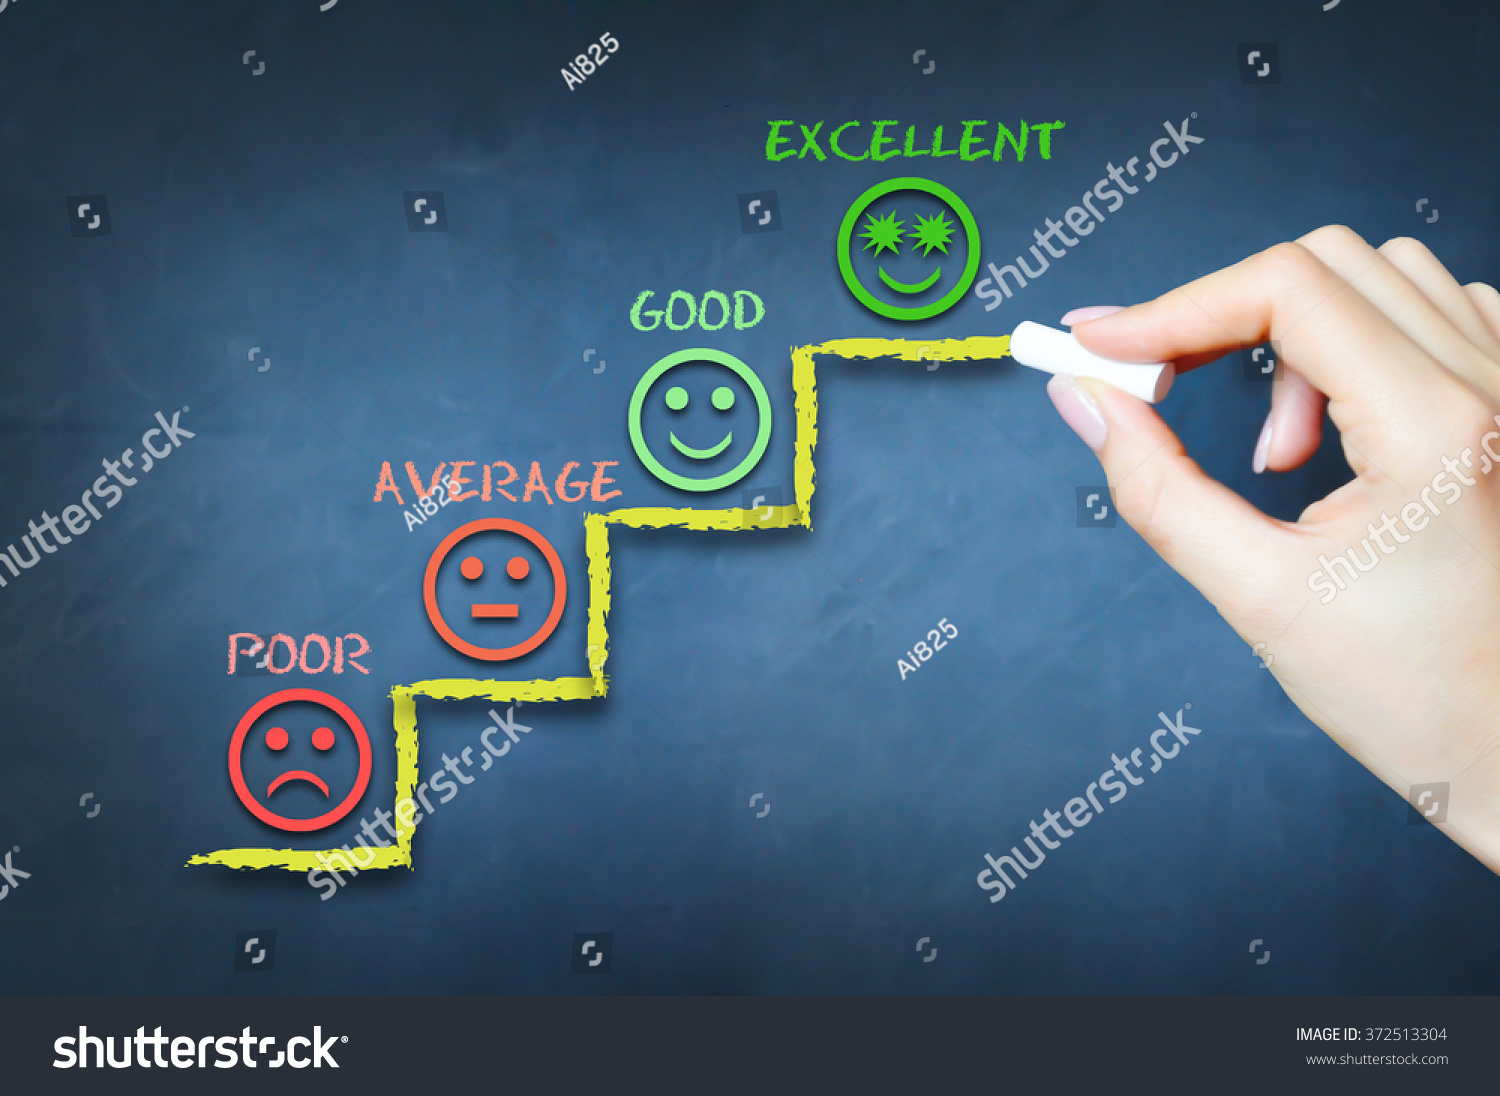 Customer satisfaction or evaluation of business performance #372513304